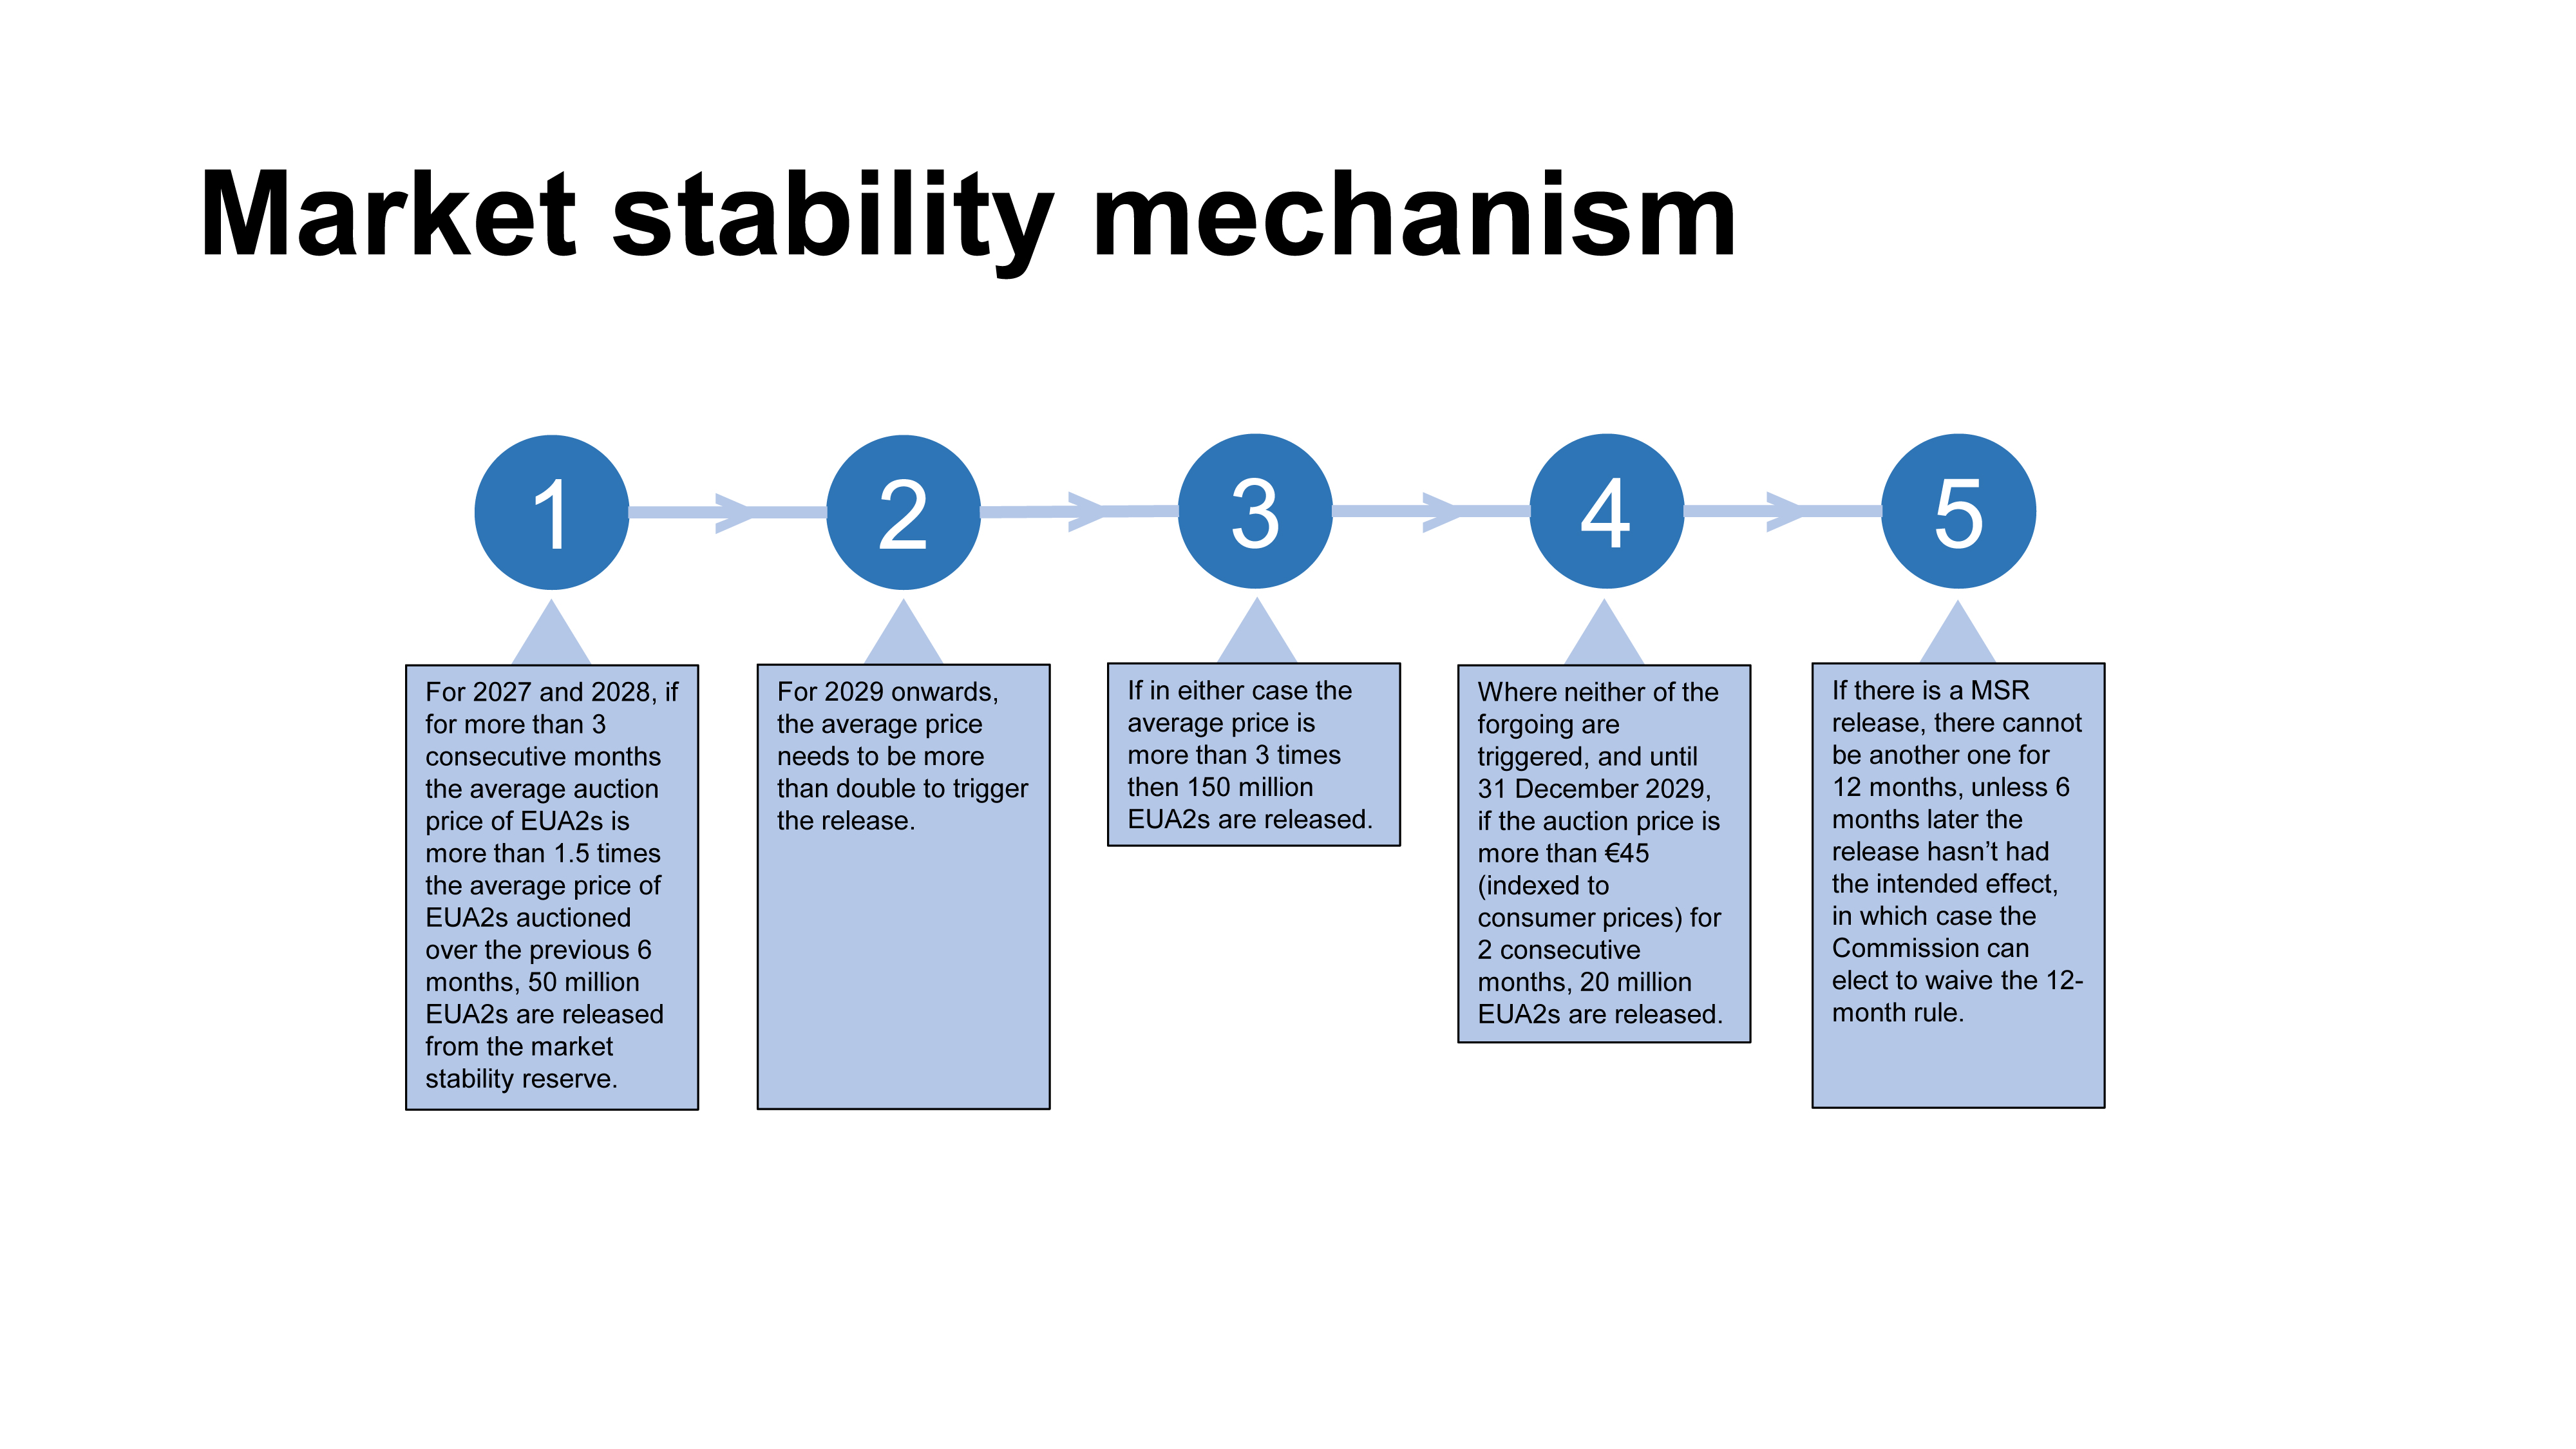 Figure 2:  Key steps in triggering the the market stability reserve